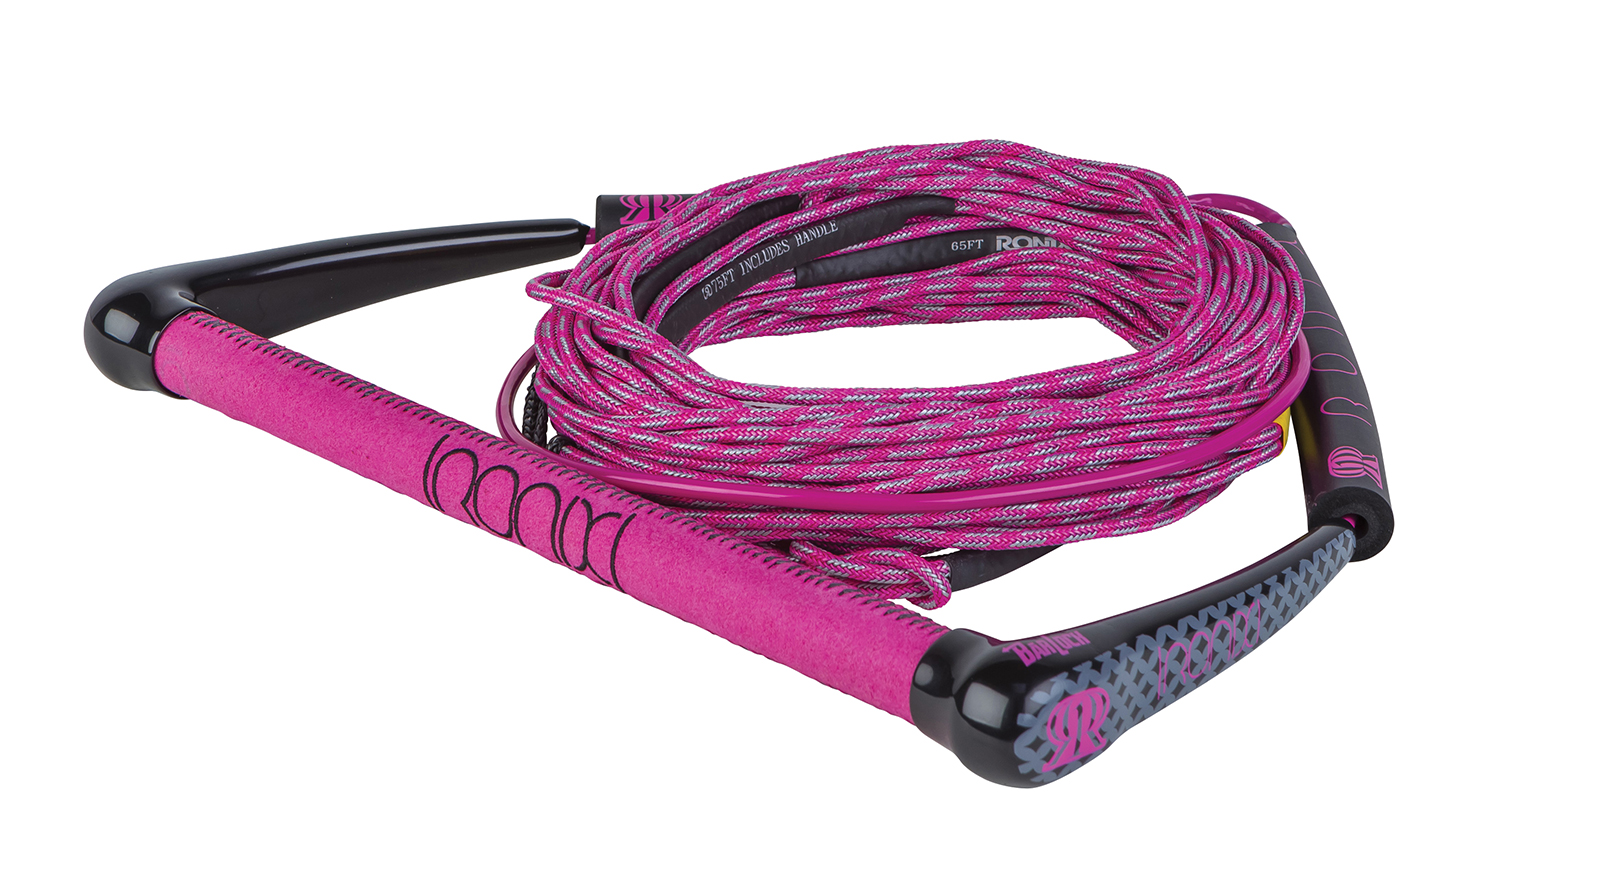   COMBO WOMEN'S HIDE GRIP W/70 FT SOLIN ROPE PACKAGE RONIX 2019